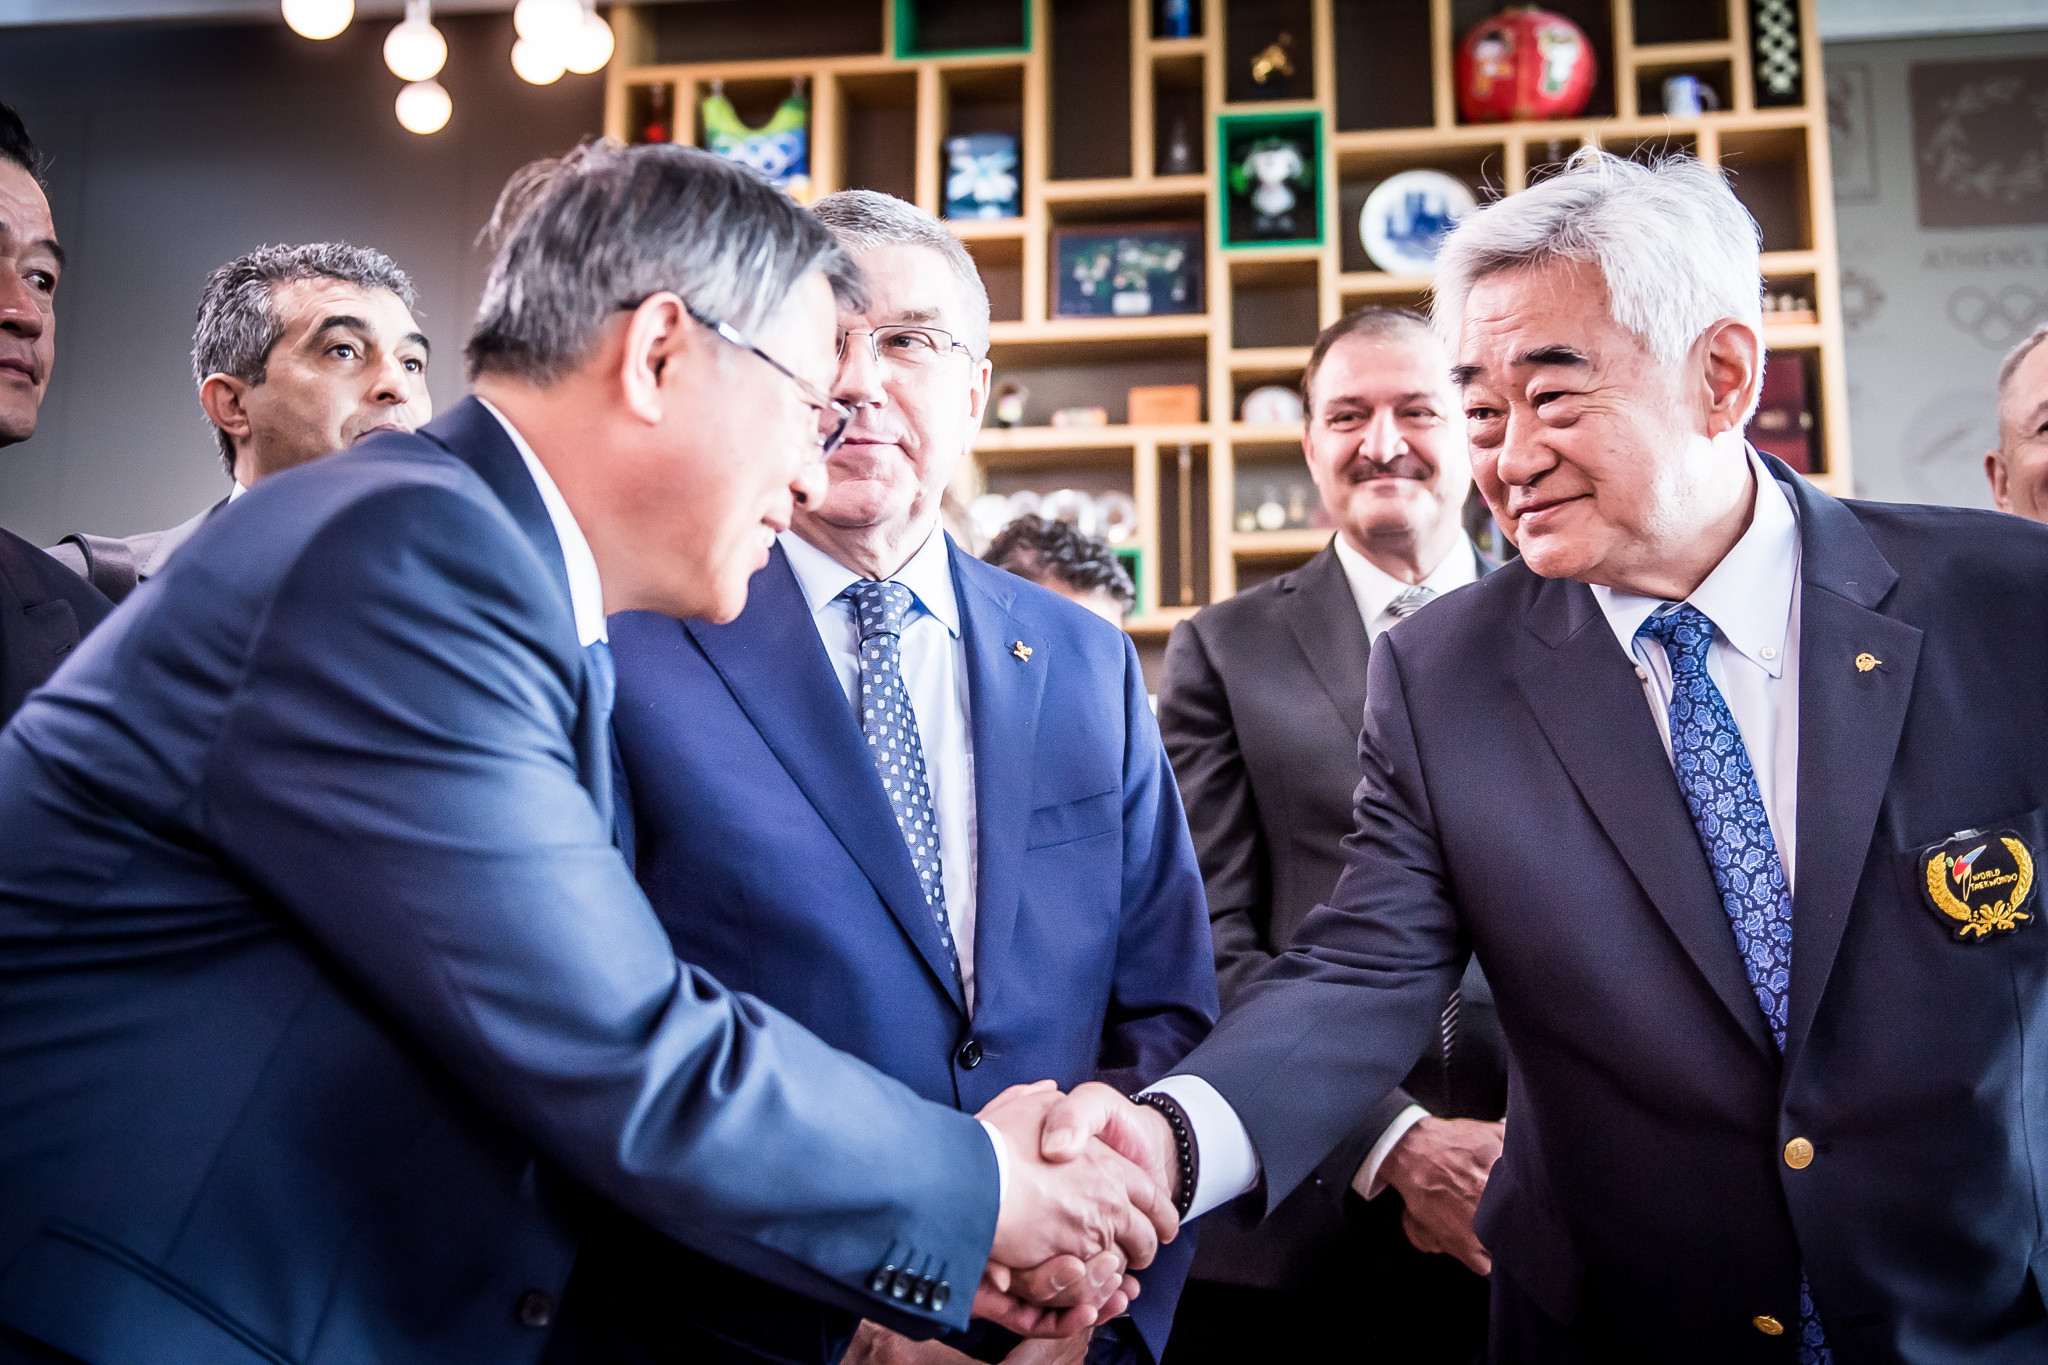 WT President Choue Chung-won and ITF President Ri Yong-son were in attendance at the joint demonstration at the Olympic Museum in Lausanne ©World Taekwondo